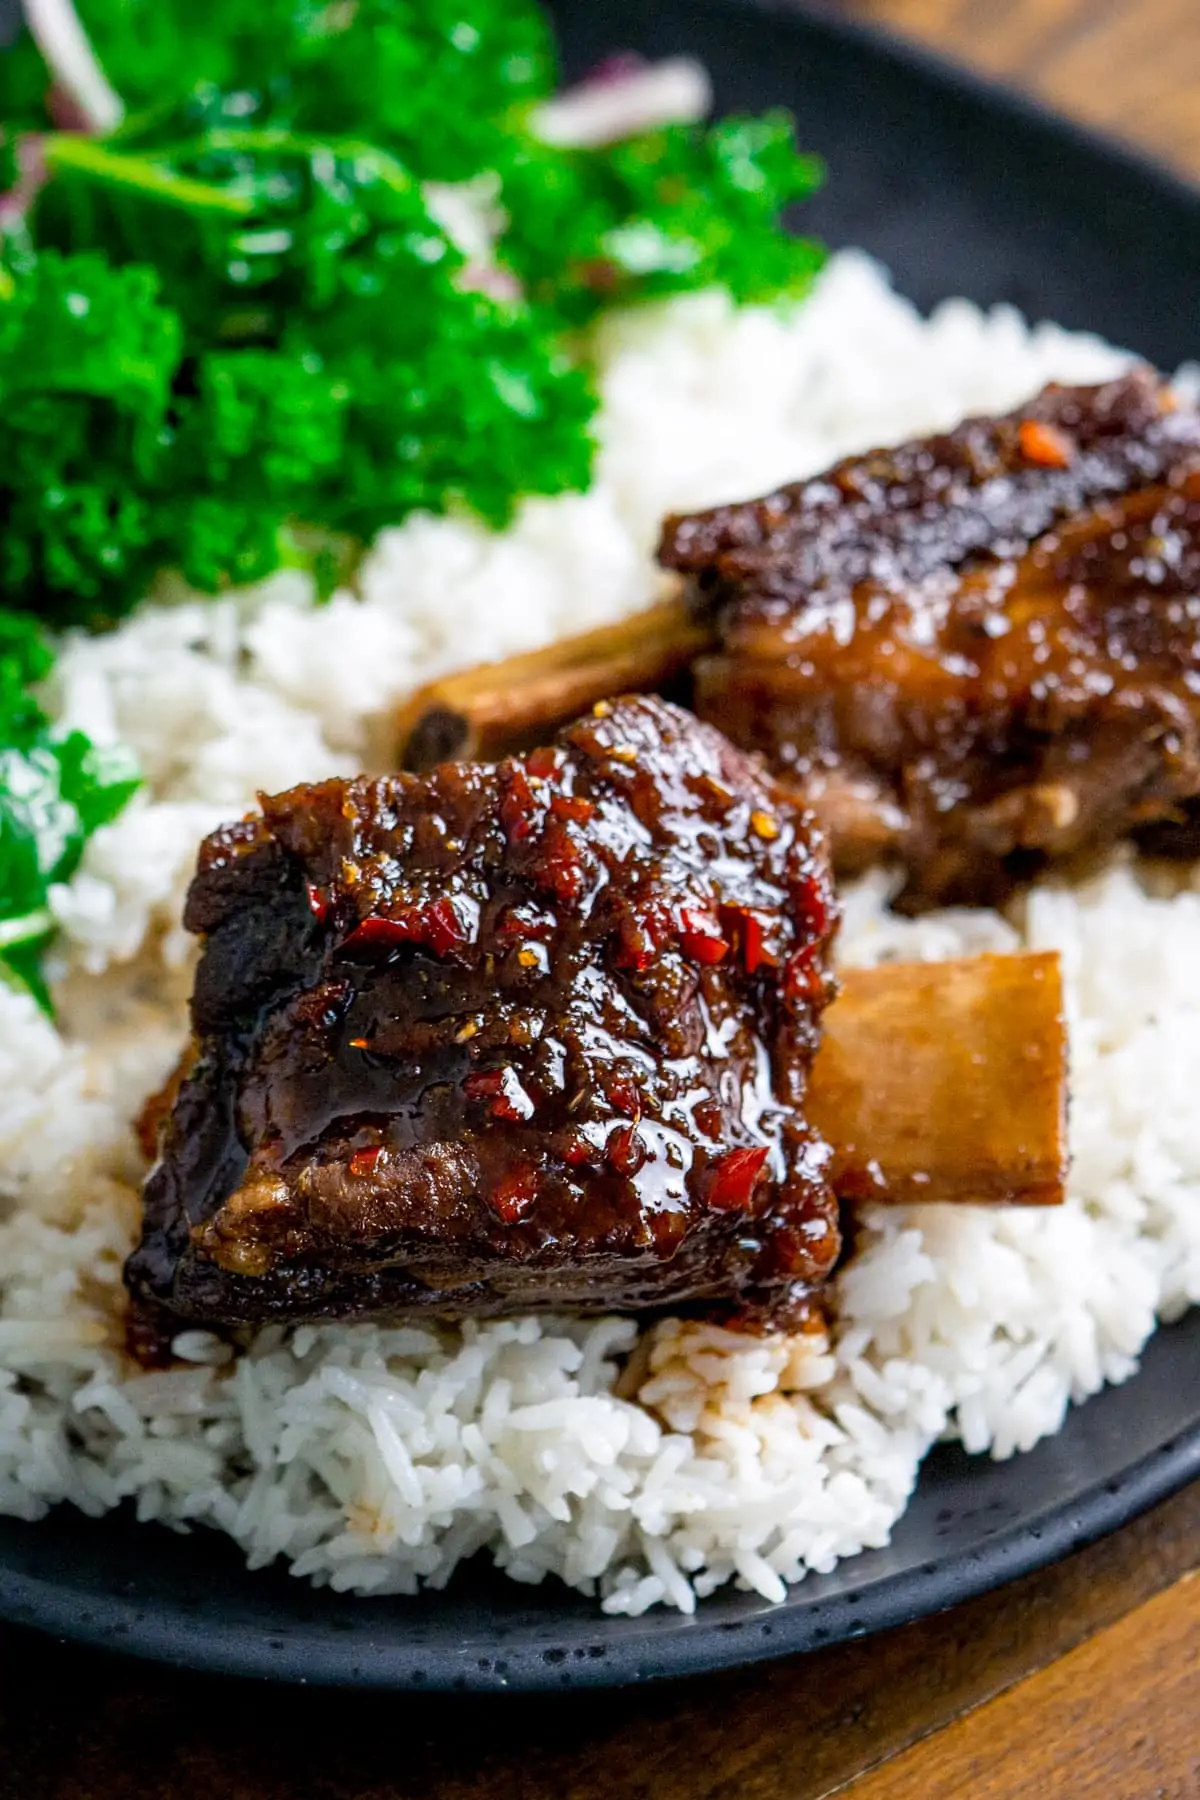 Slow cooked short ribs with chilli glaze on a bed of rice on a dark plate. Kale is also on the plate in the background.